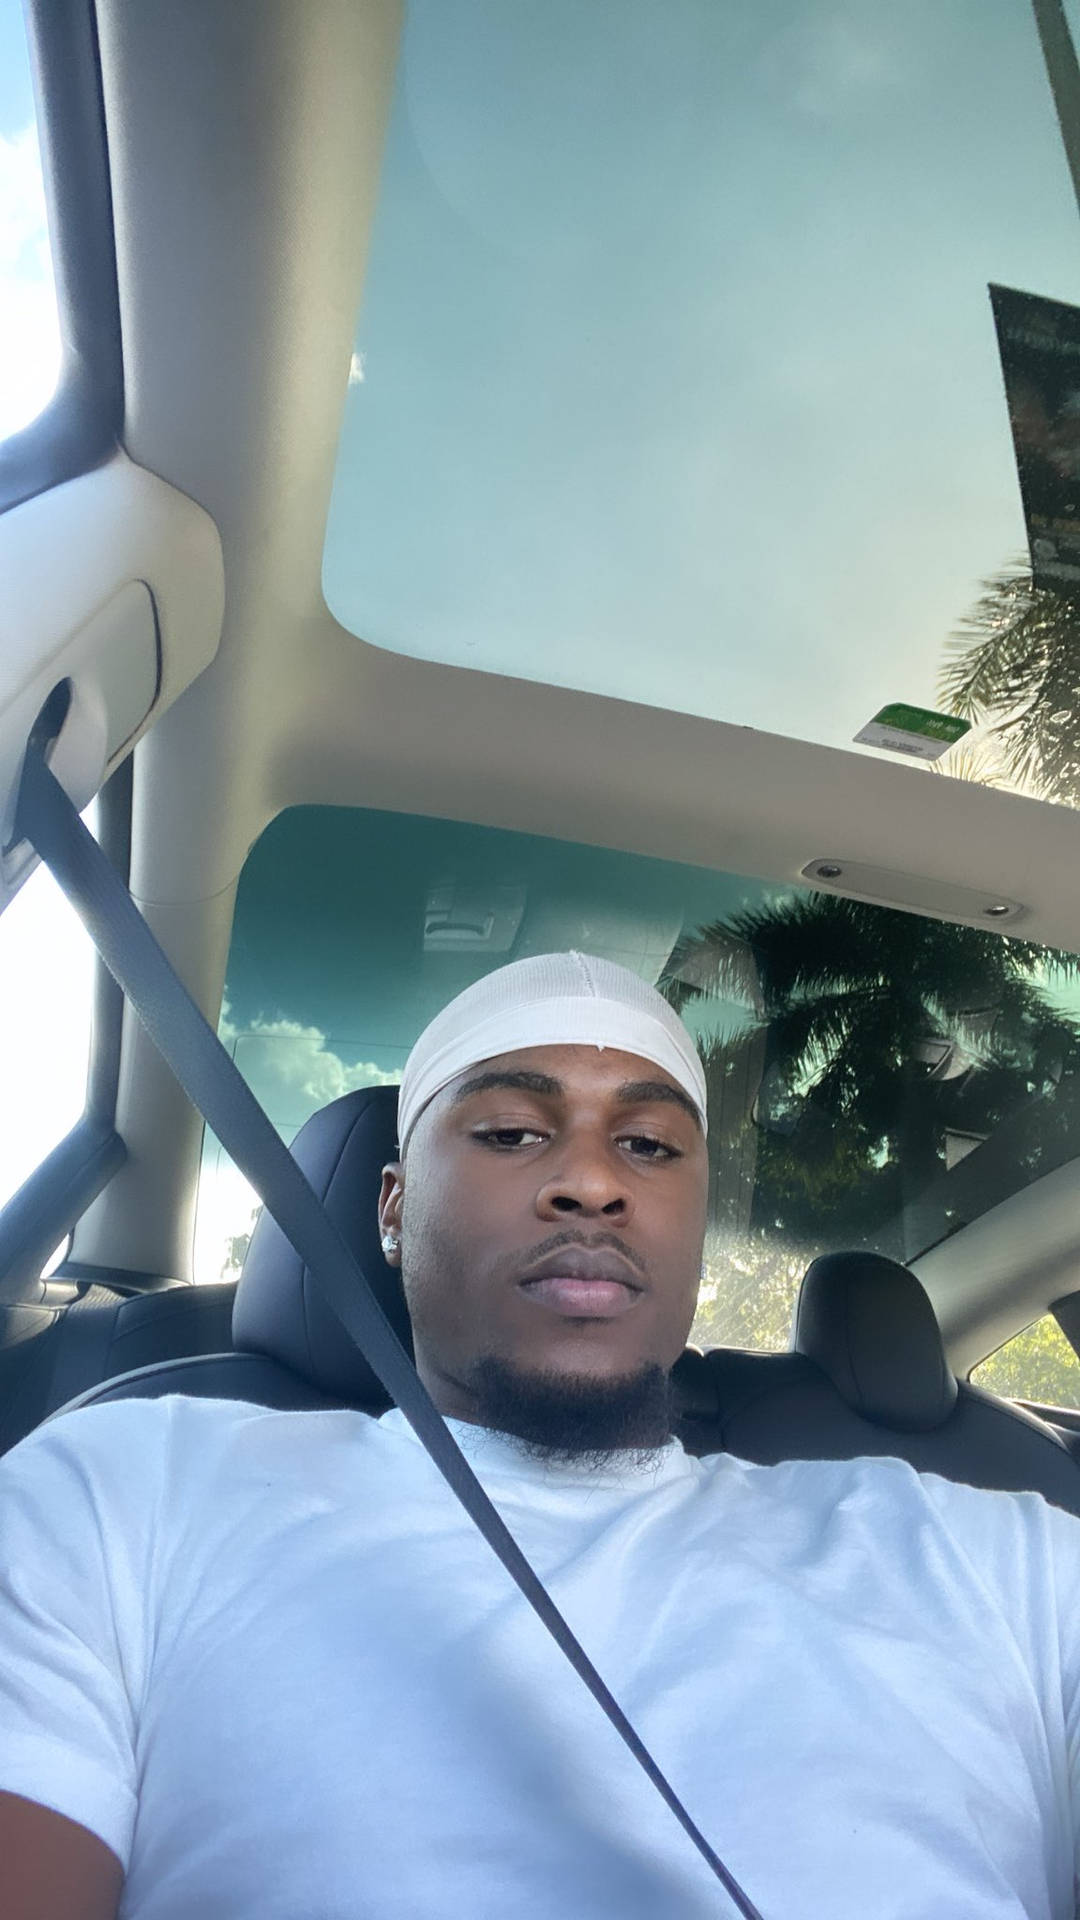 Caption: Instagram Star Swavy Lee Living the White-Themed Luxury in a Car Selfie Wallpaper